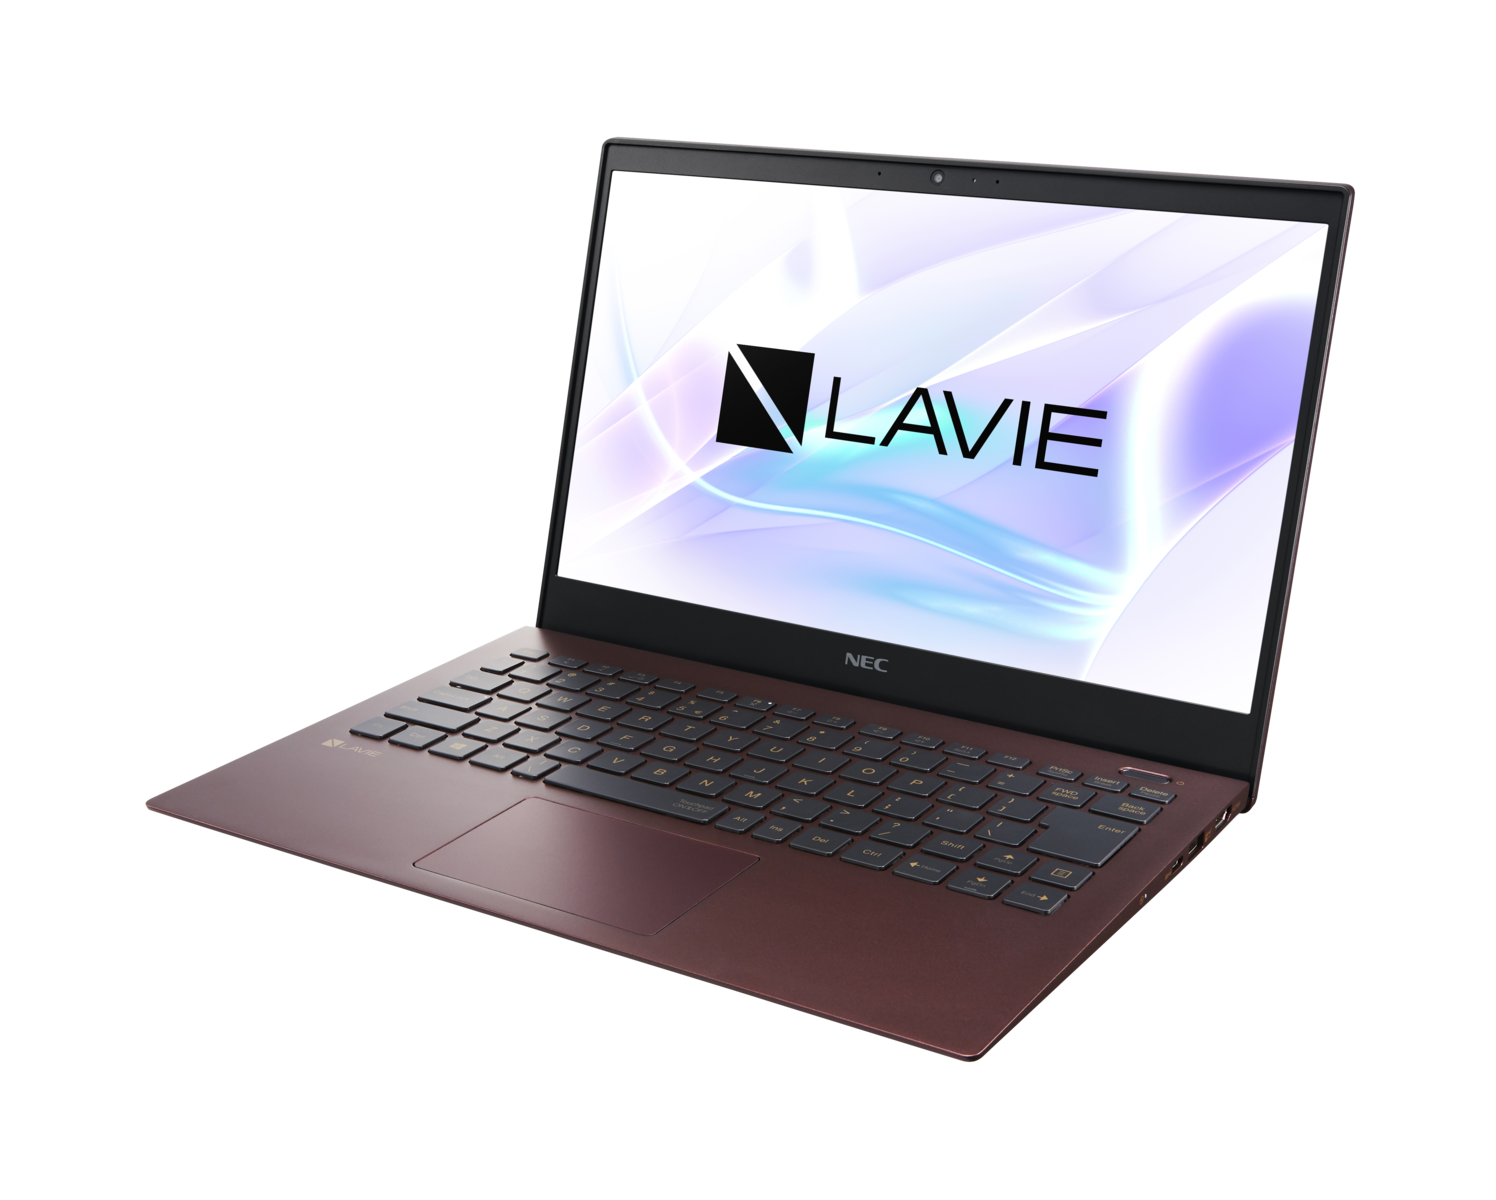 The NEC Lavie Pro Mobile is a stylish Ultrabook under 1 kg